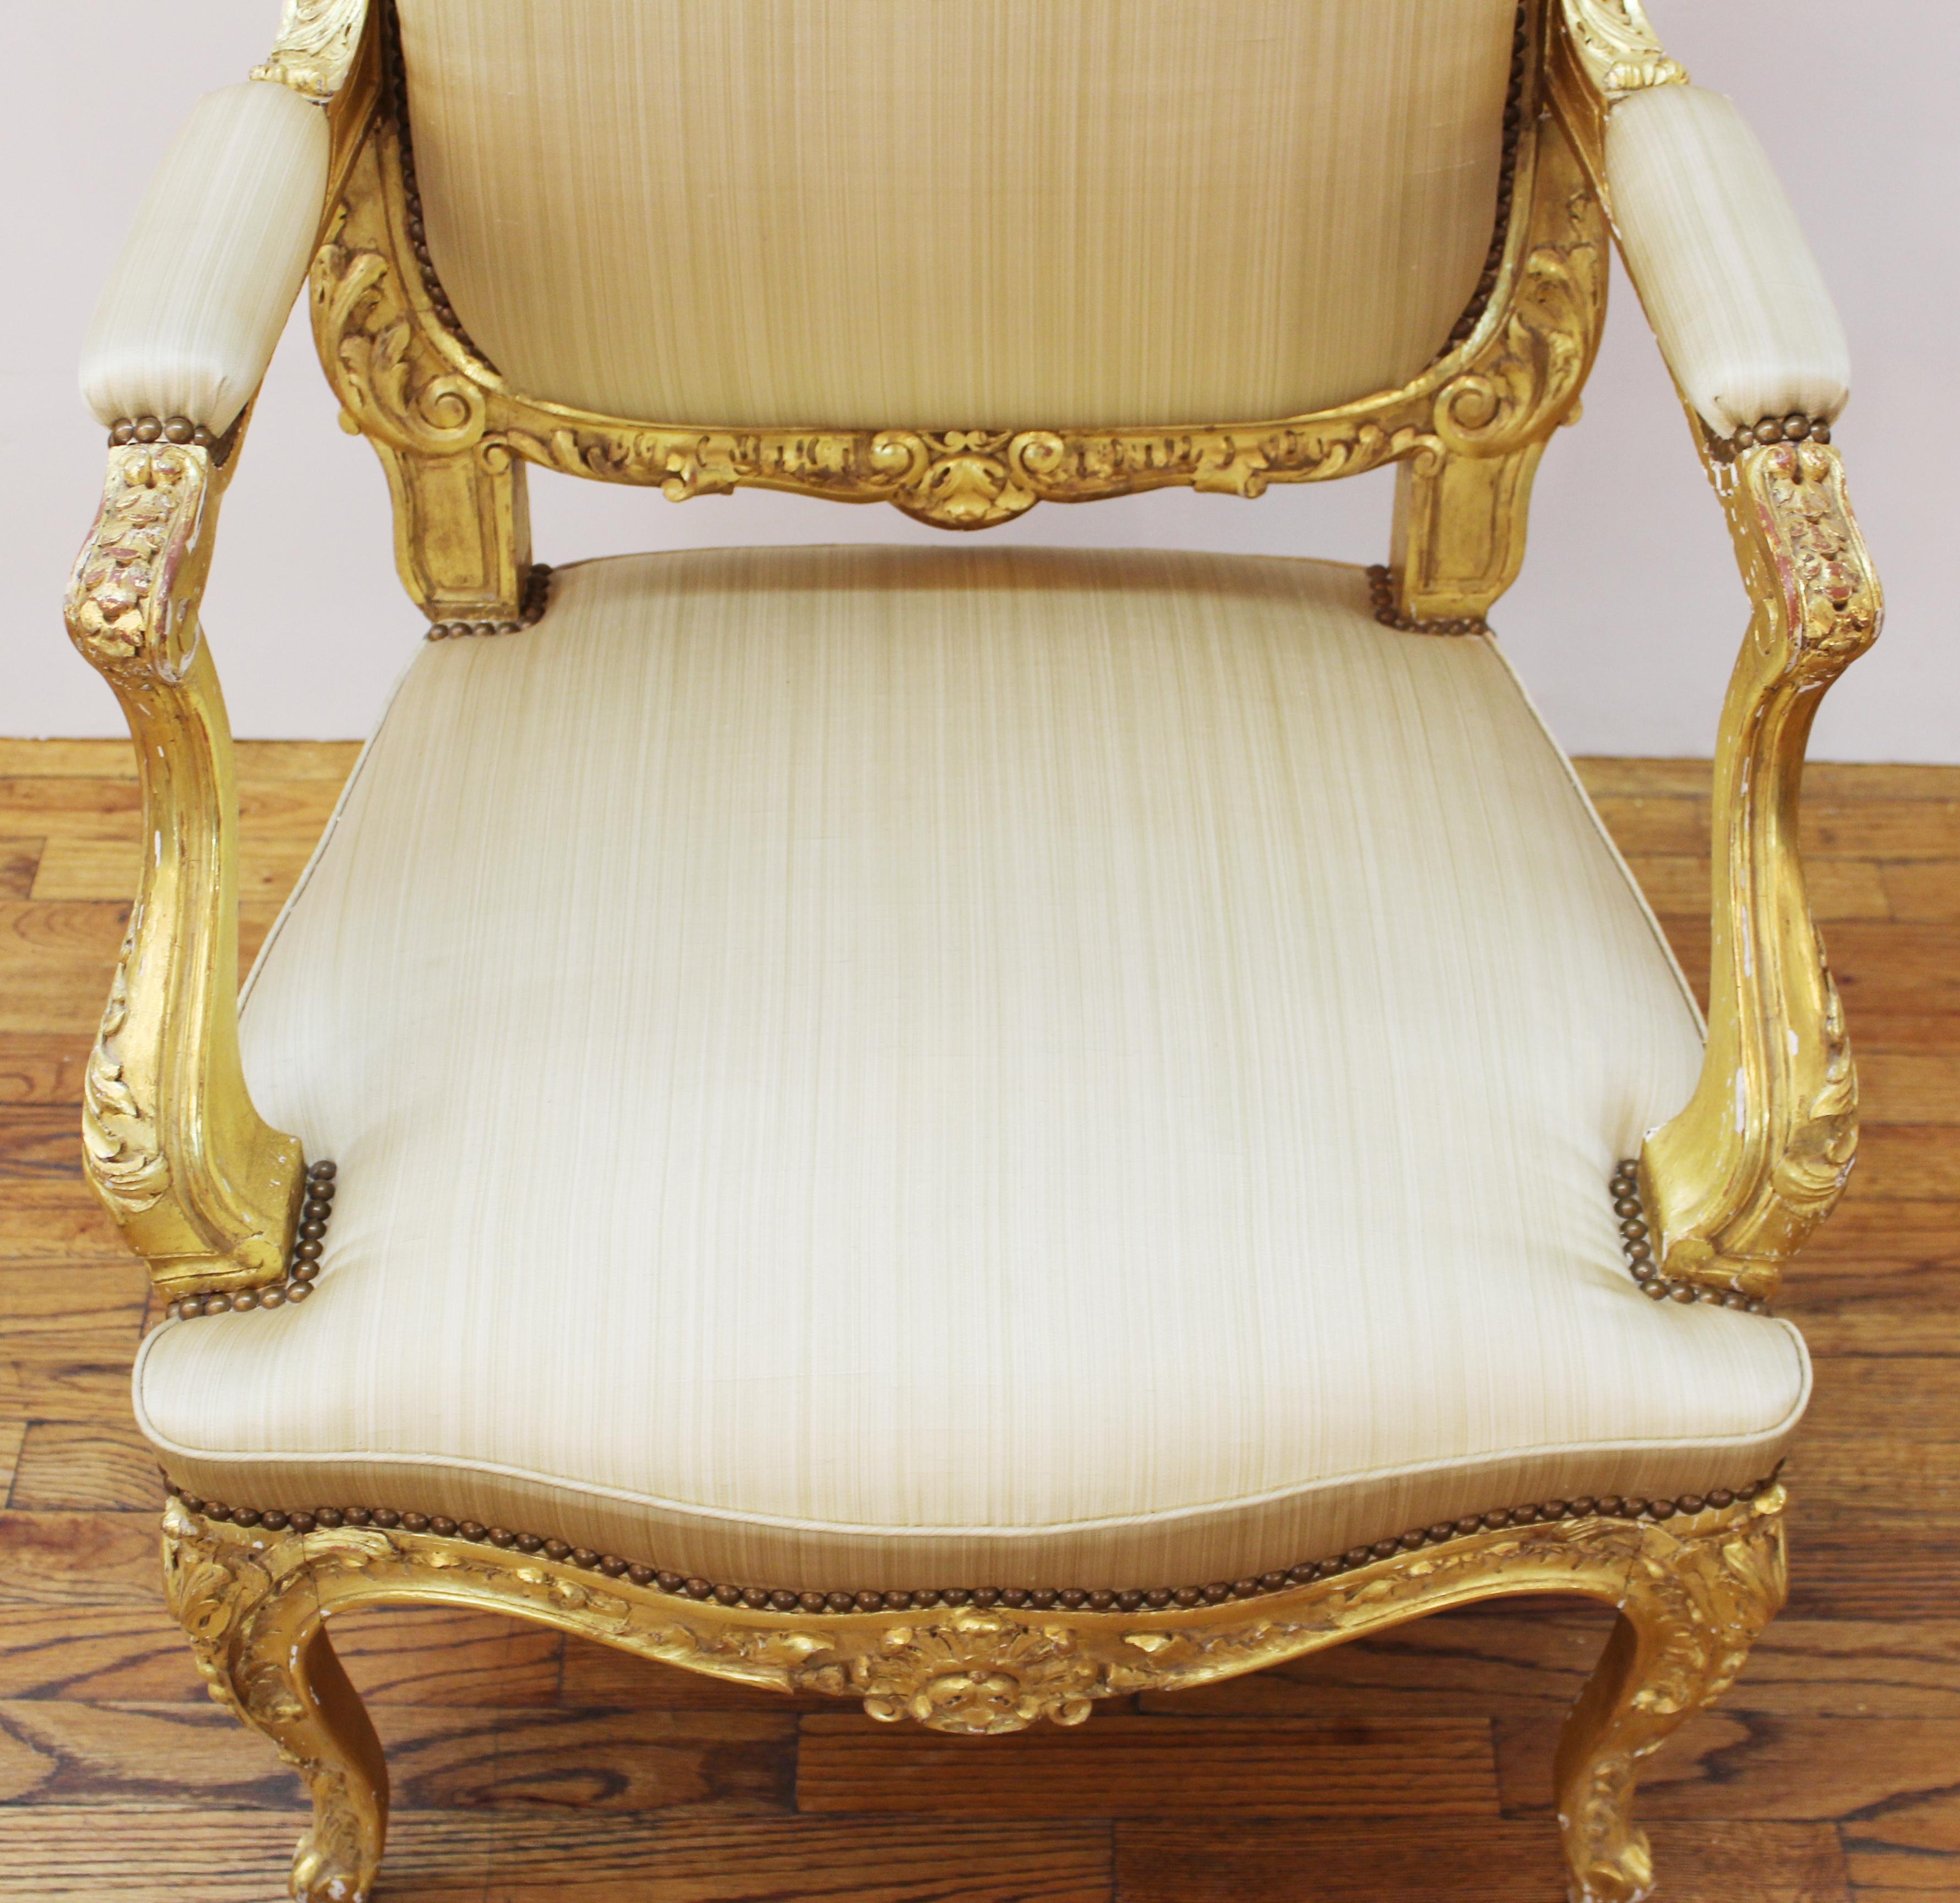 Upholstery North Italian Baroque Giltwood Fauteuils